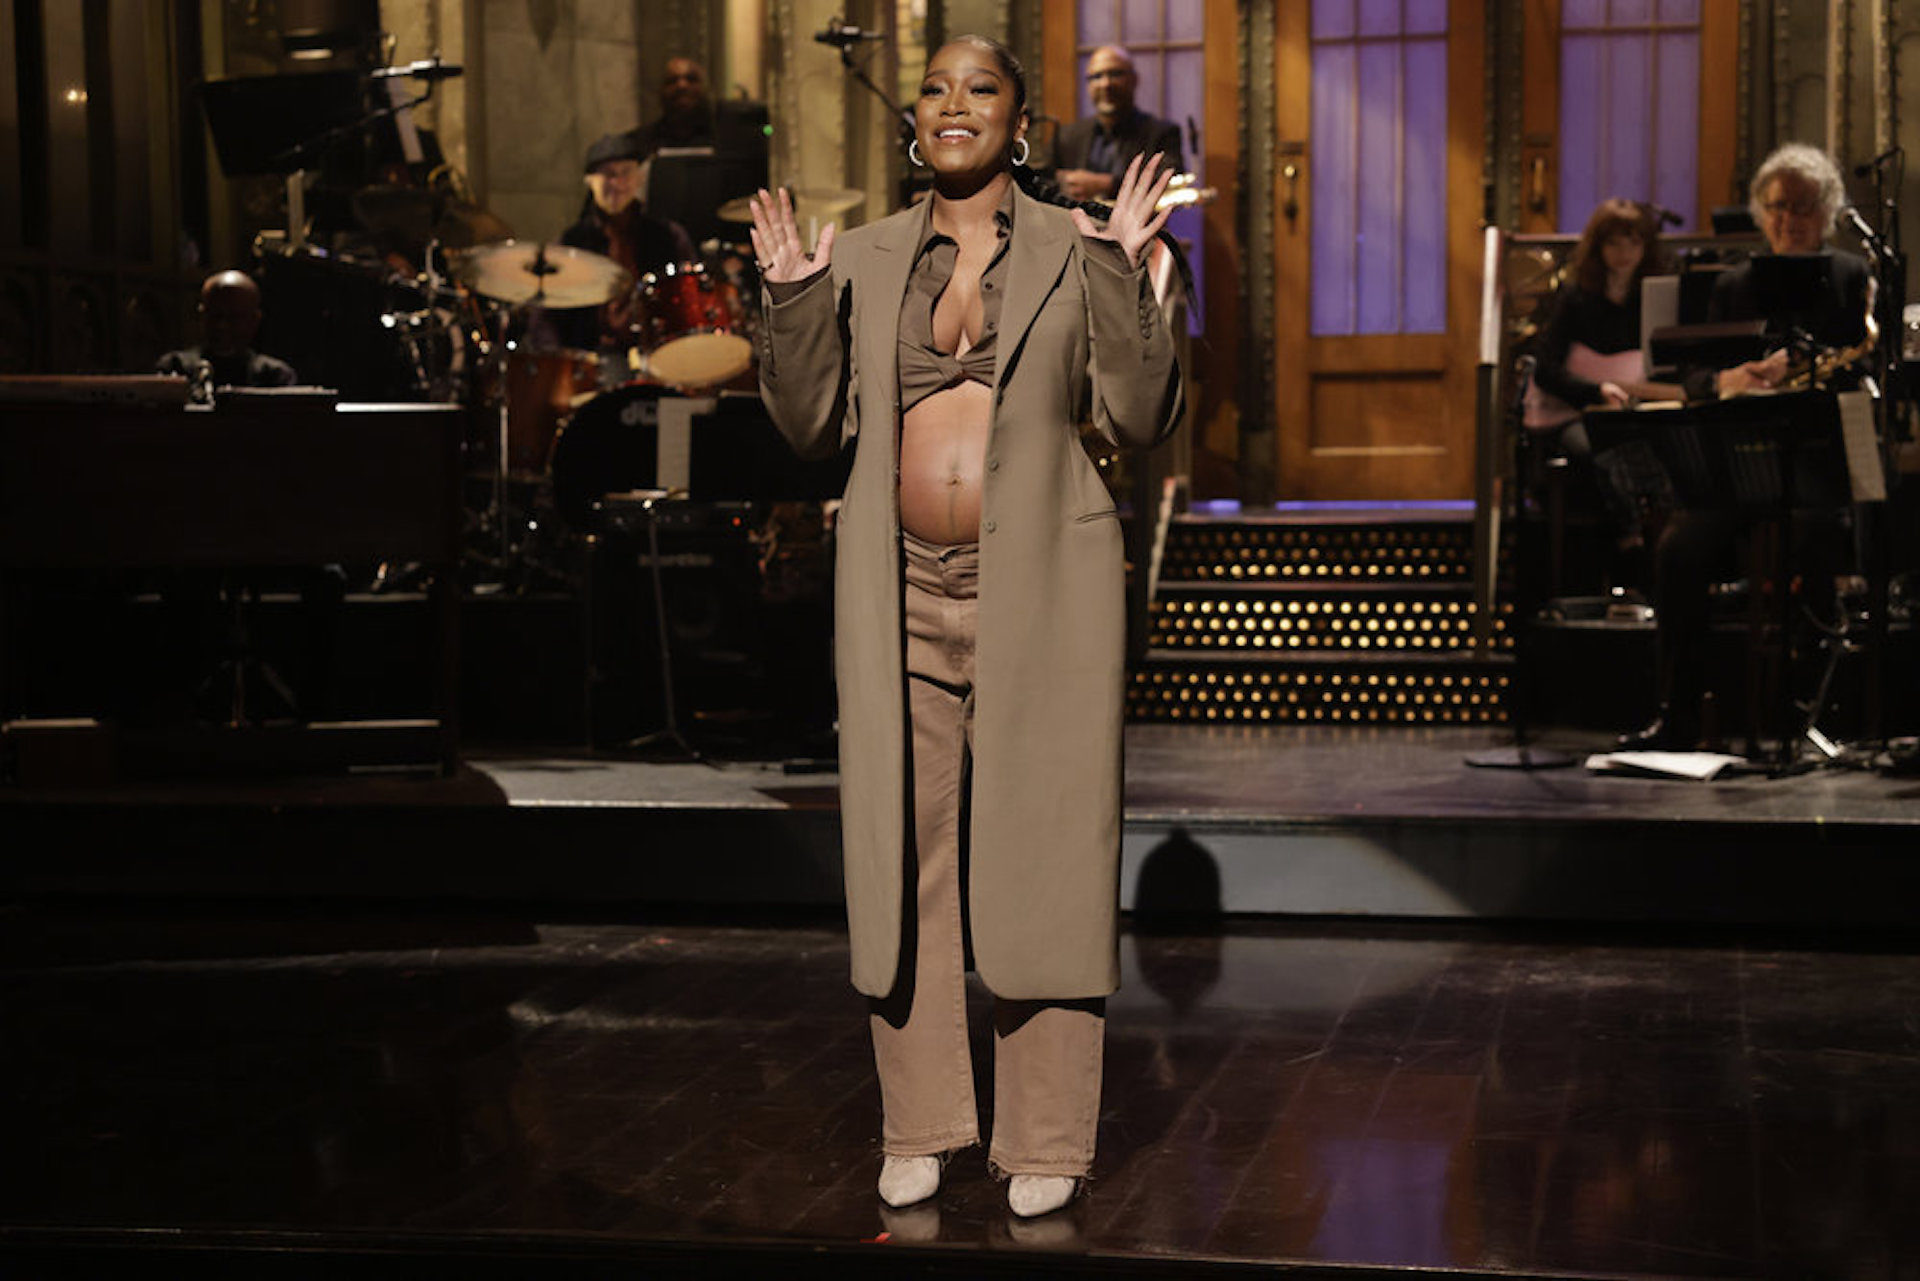 Keke Palmer continues to update fans on her pregnancy journey. The 'Nope' actress is expecting her first child with her partner, Darius Jackson.